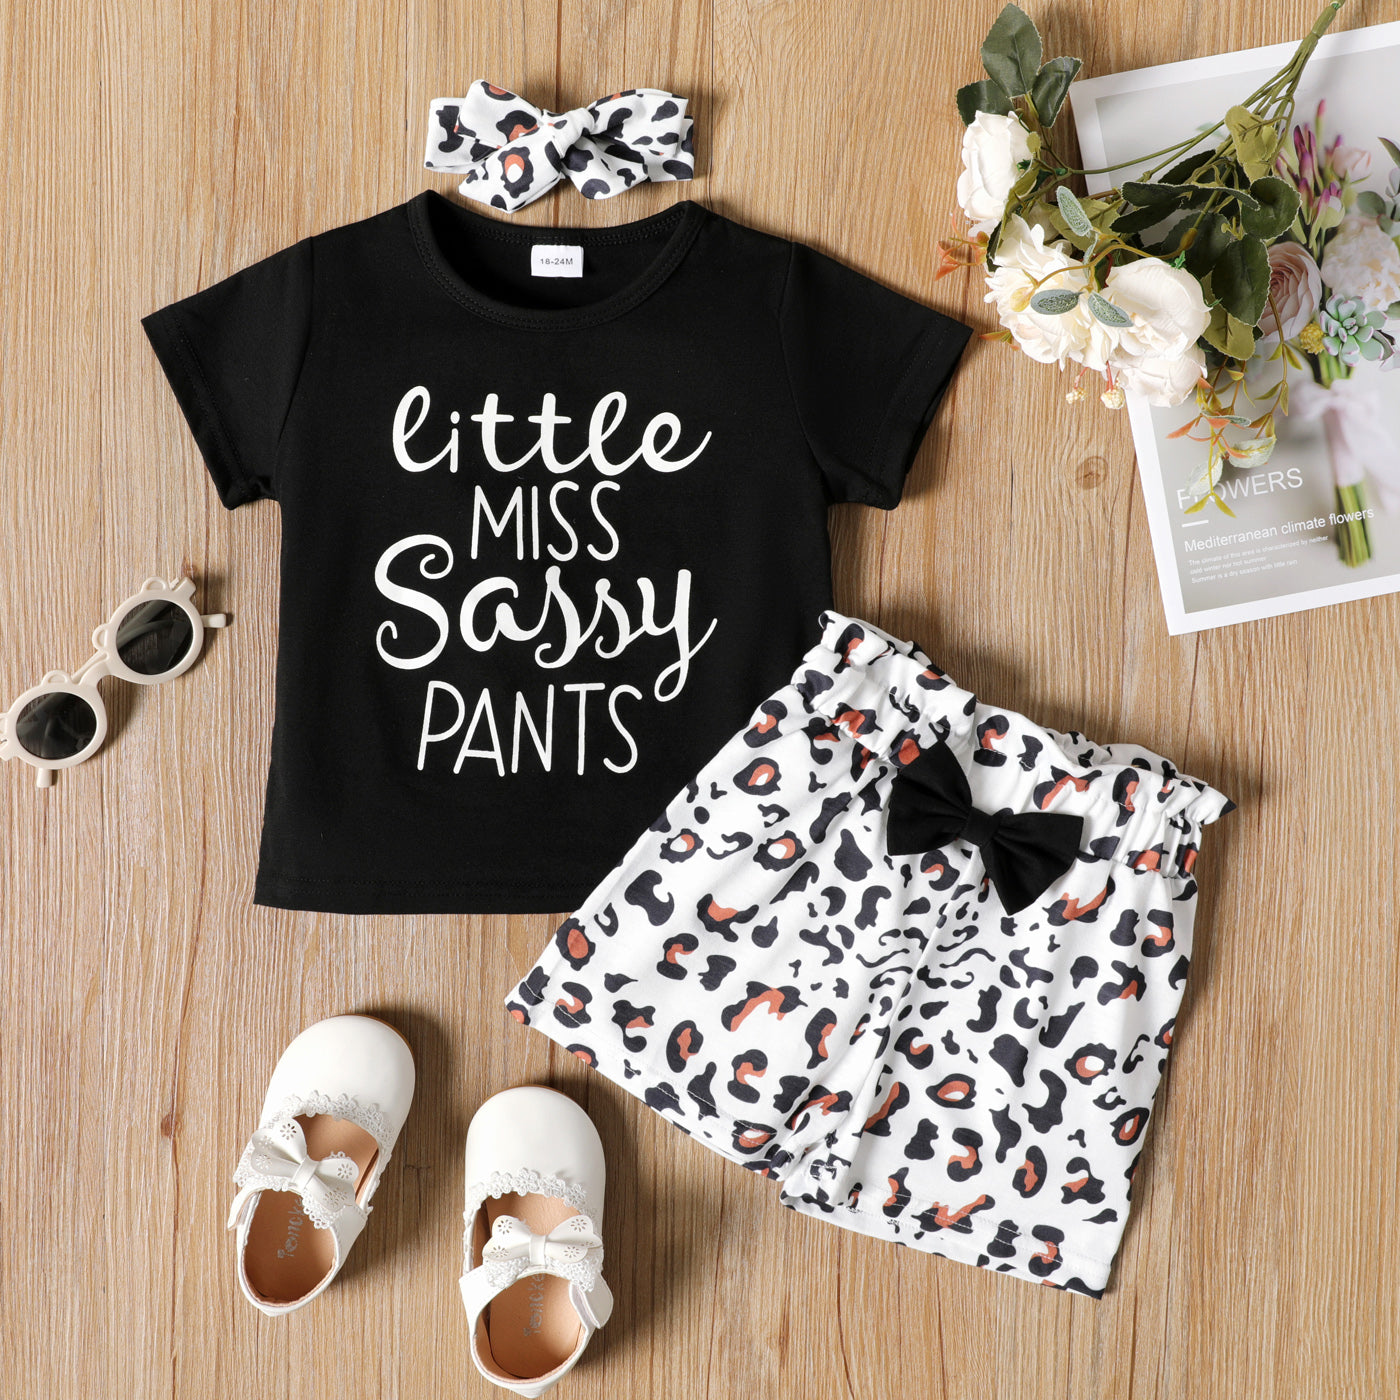 2-piece Toddler Girl Letter Print Black Tee and Bowknot Shorts Set